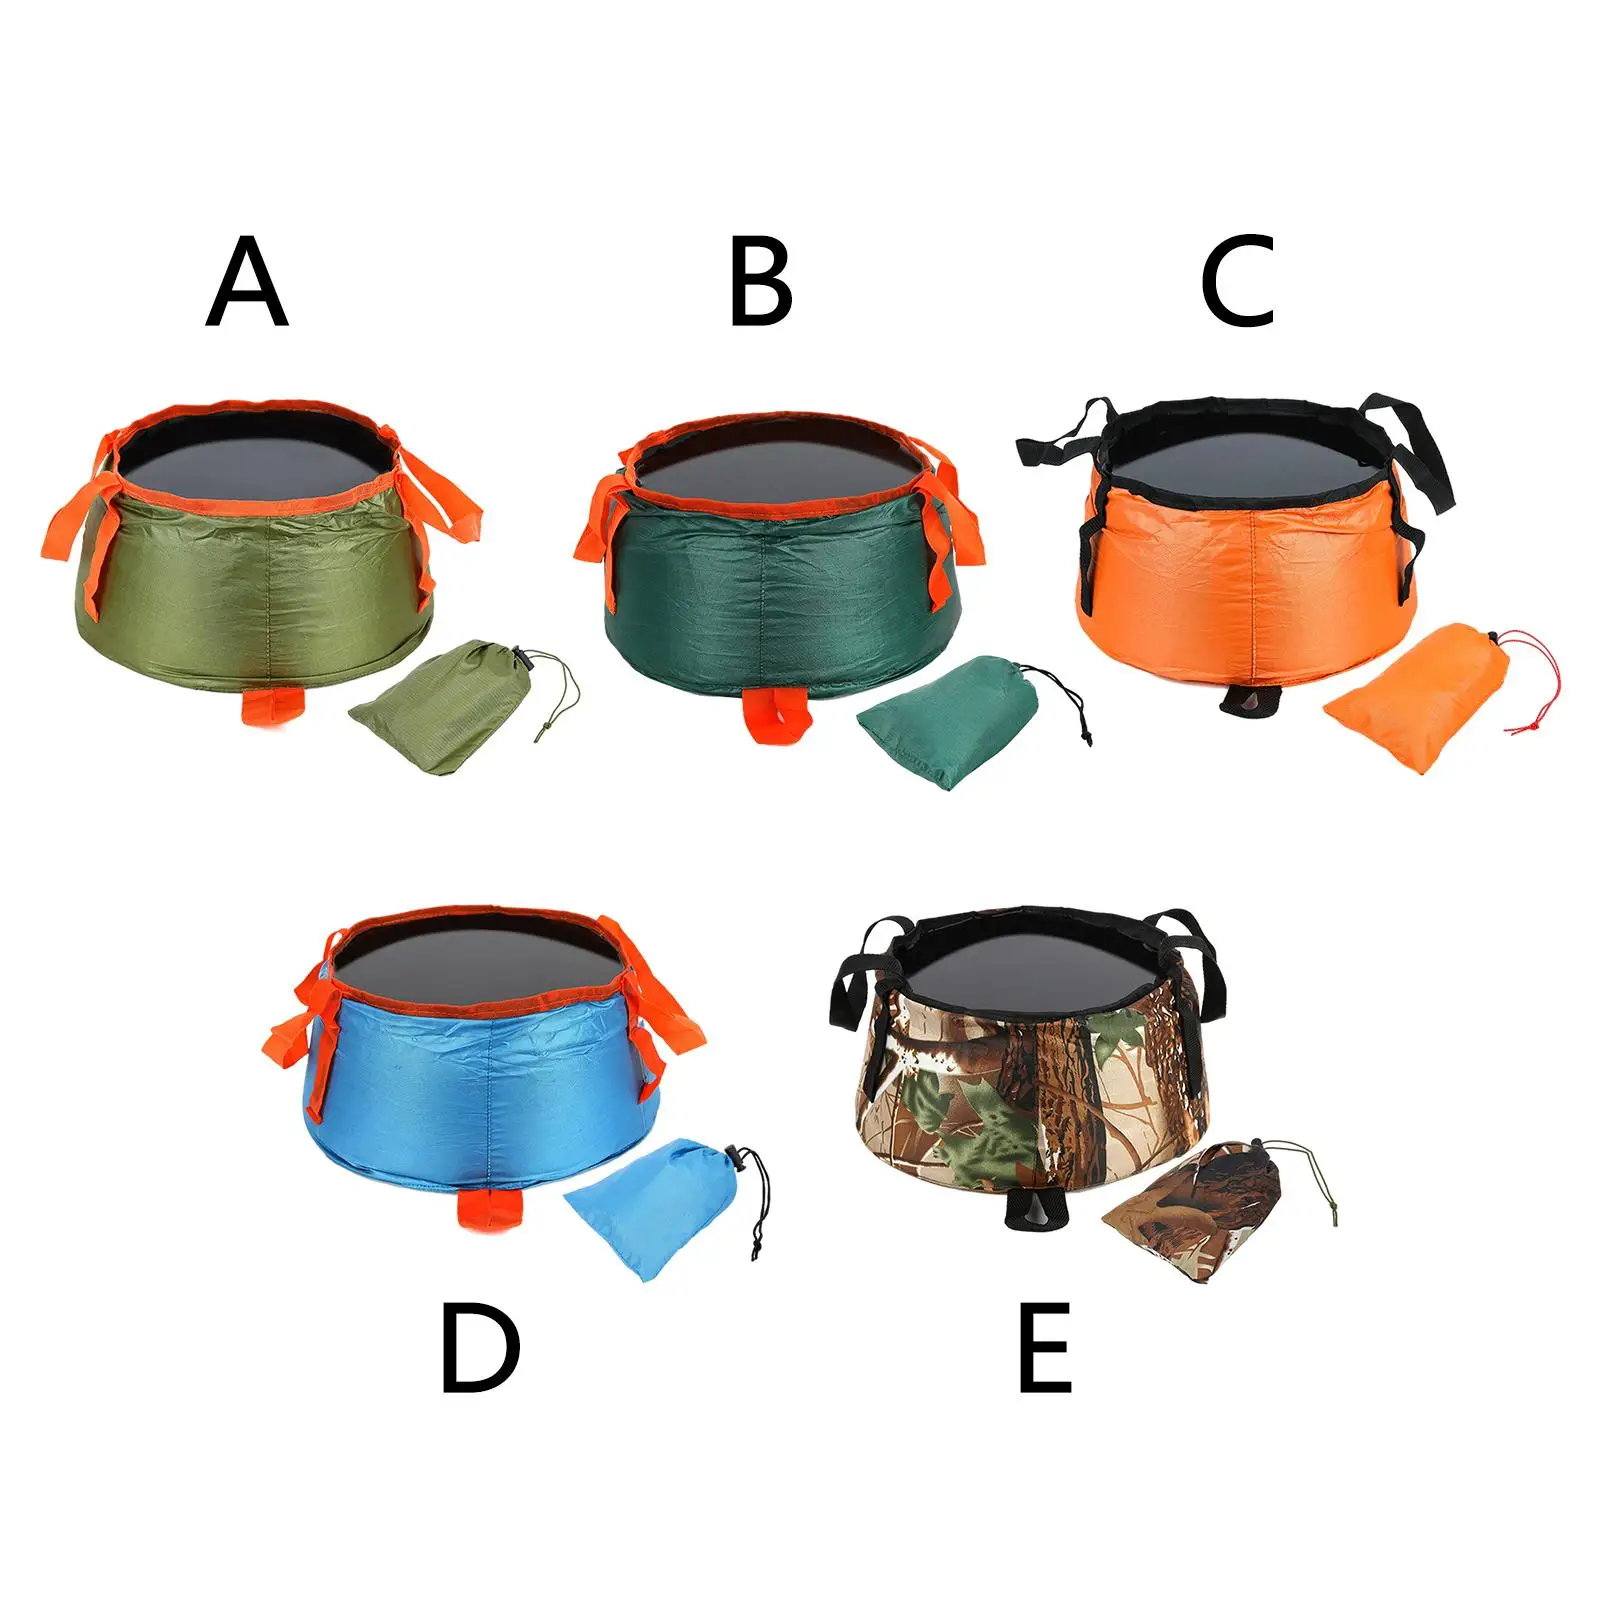 Folding Collapsible Bucket Foldable with Carry Bag Camping Outdoor Caravan